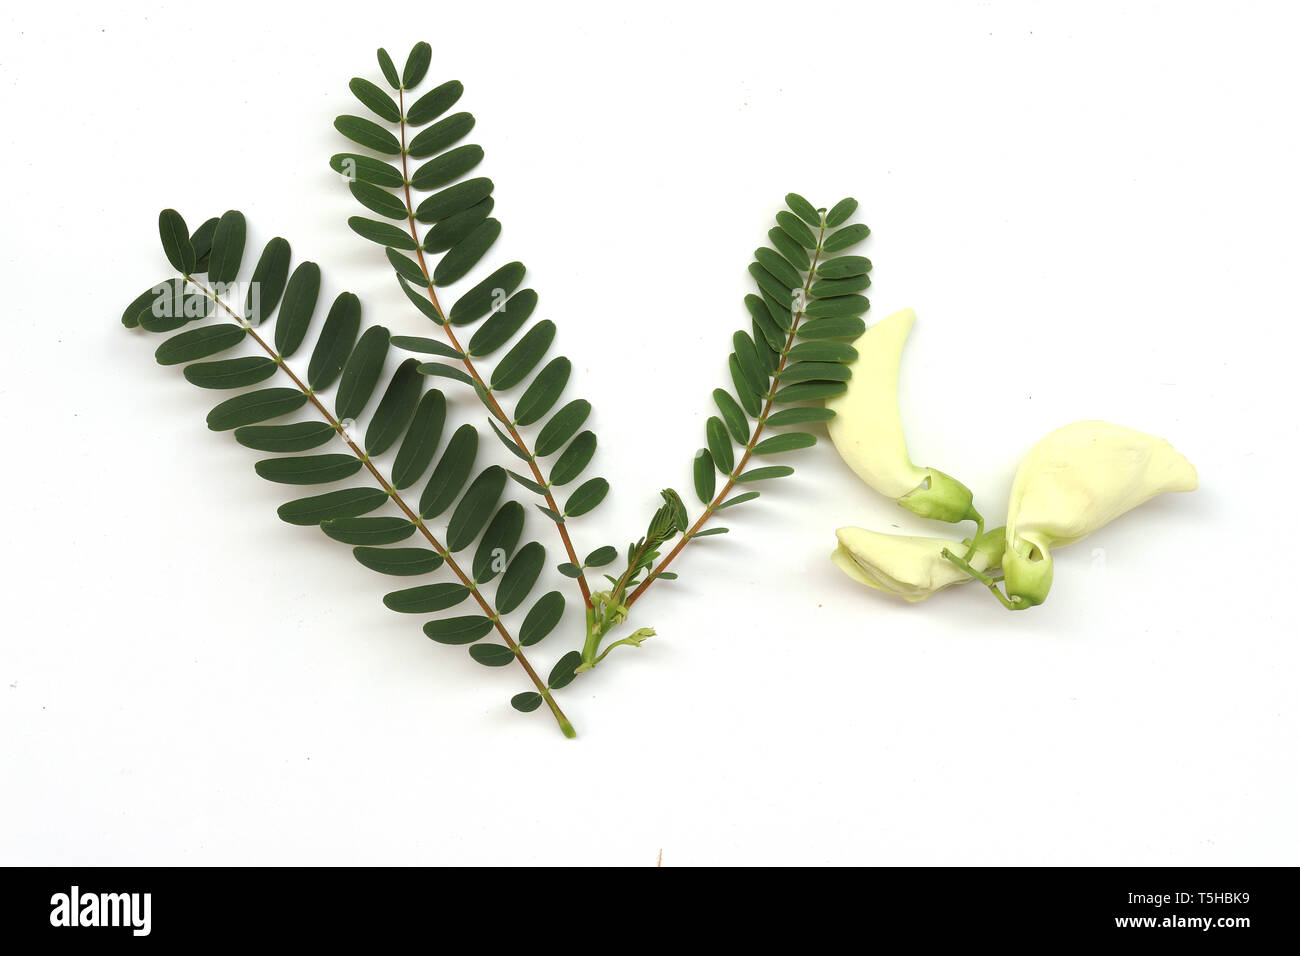 green agasta with leaf : Sesbania grandiflora , Aeschynomene , agati or hummingbird tree . can eat these flower as vegetable or herb isolated on white Stock Photo